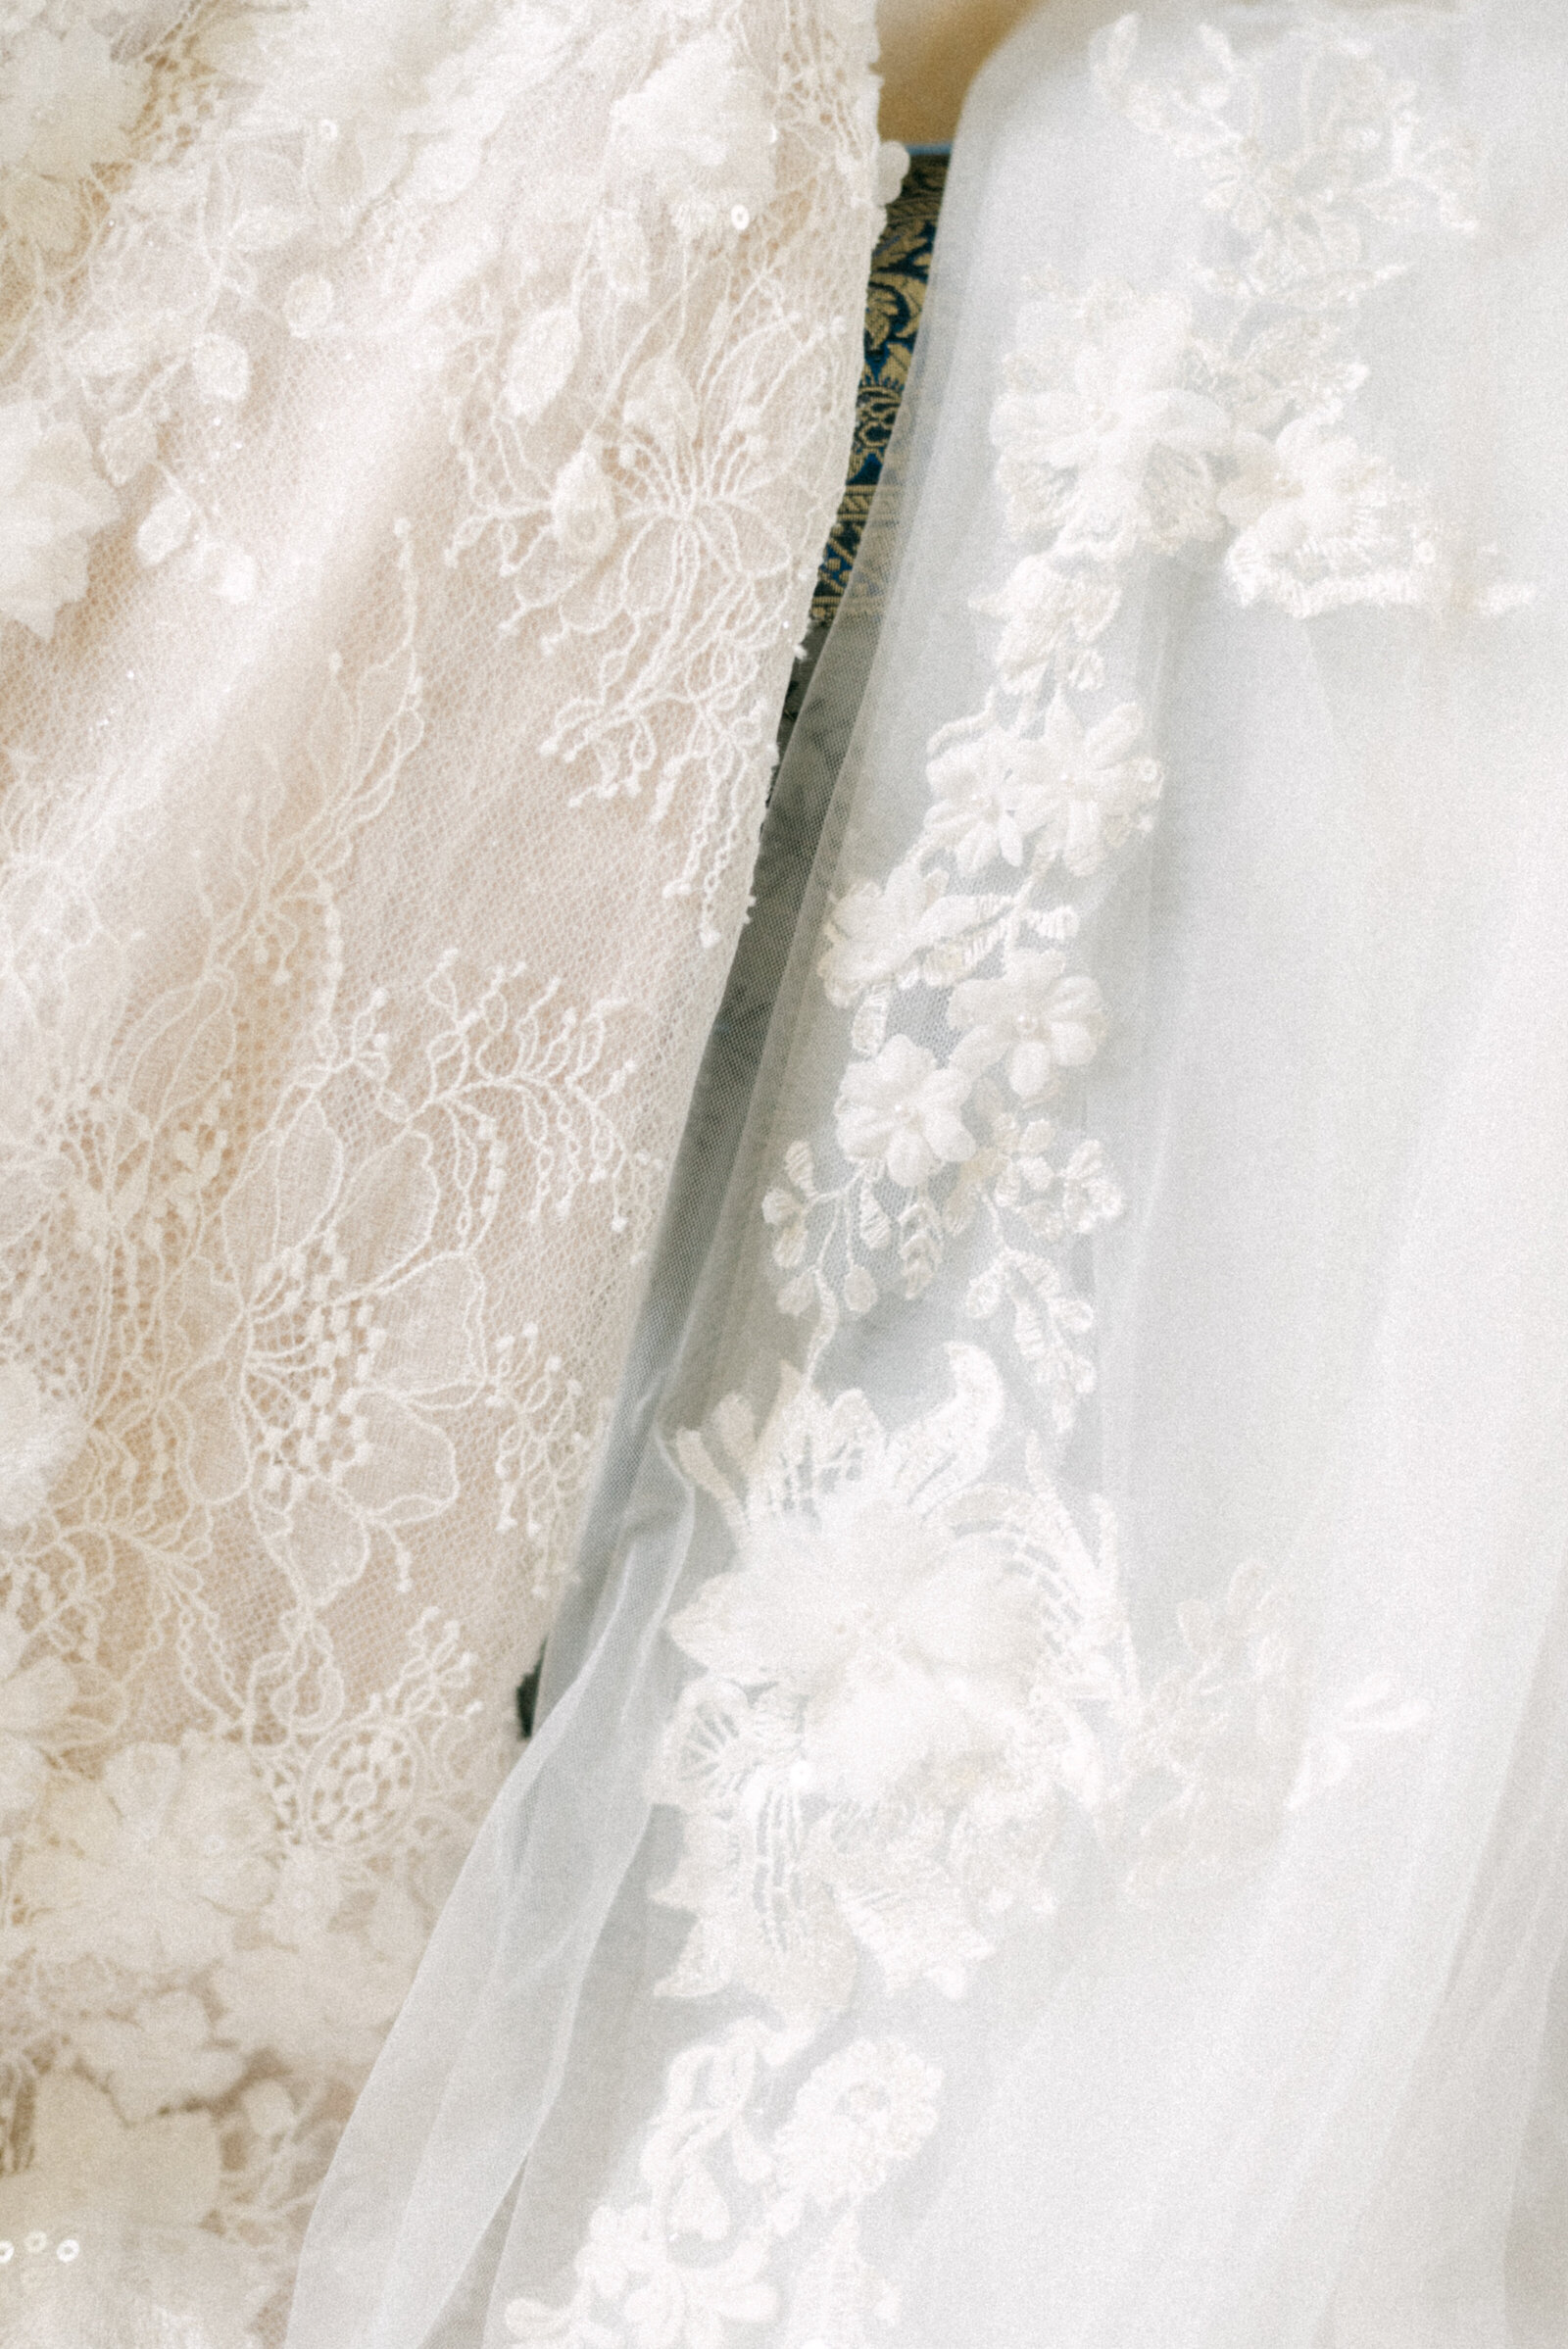 Laces of the wedding dress and the veil photographed by wedding photographer Hannika Gabrielsson.